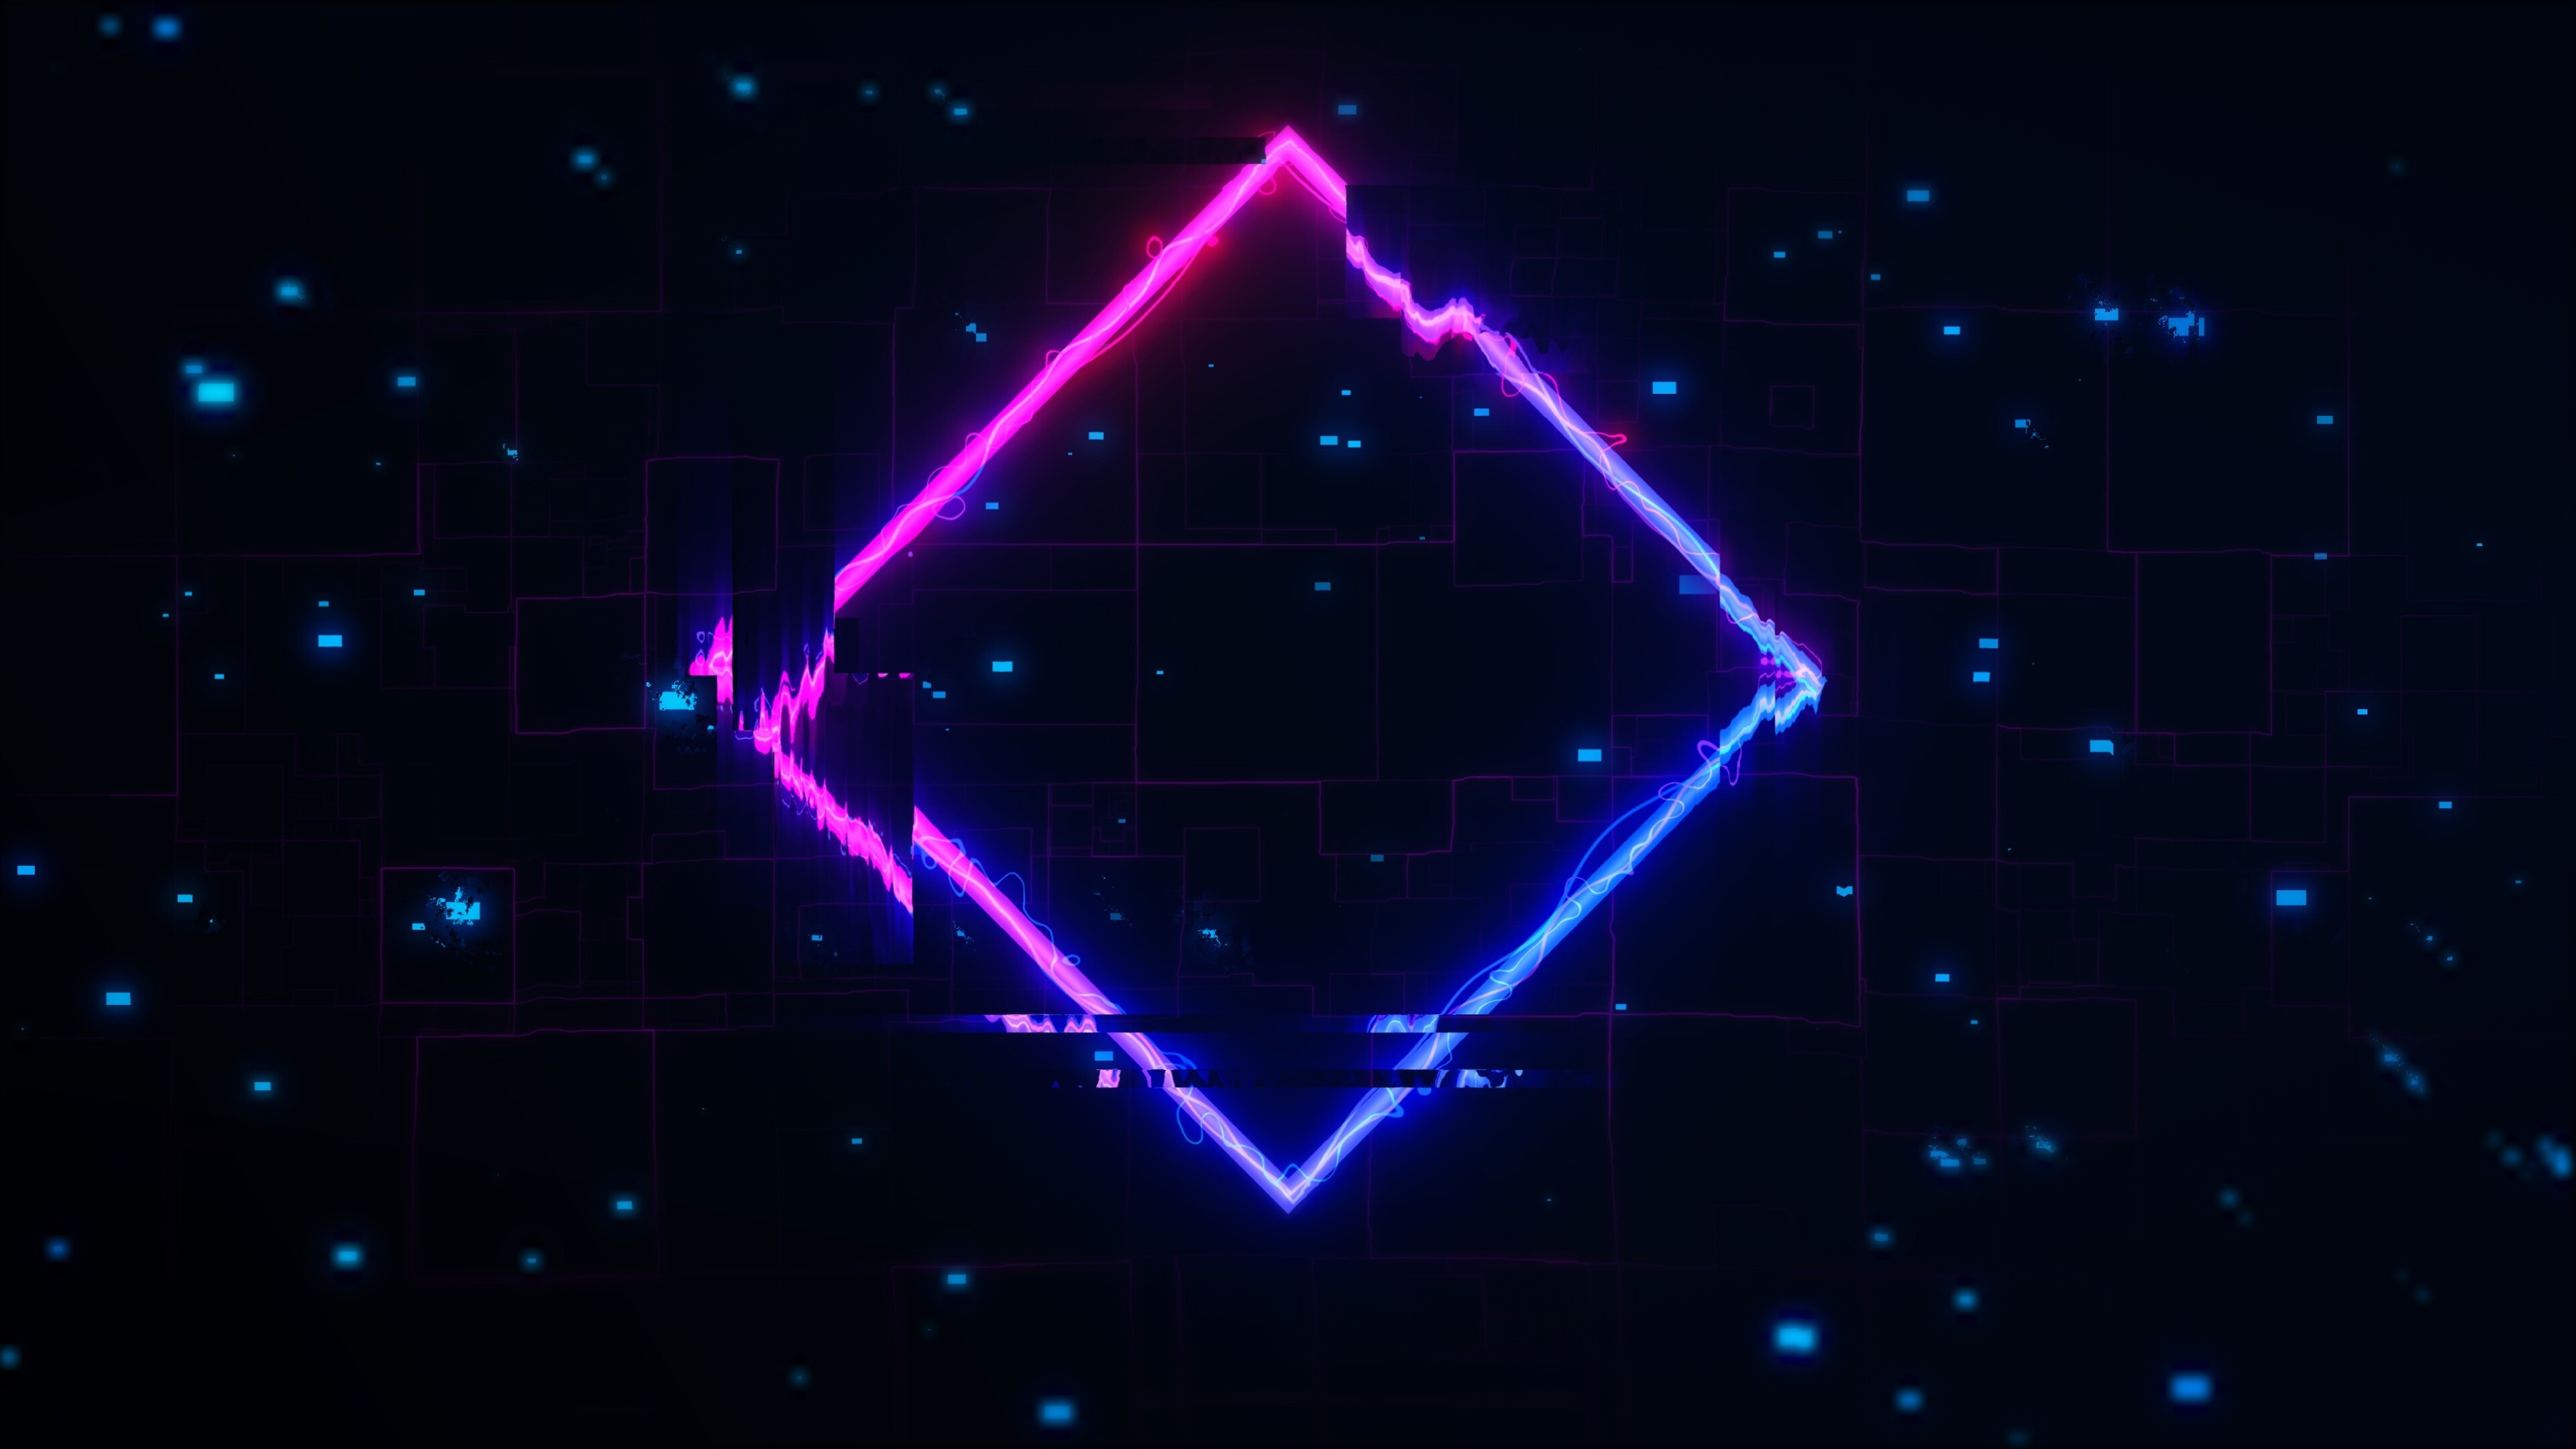 Glitch: Neon square, Chaos, Abstract, Right angles, A short-lived fault in a system. 3840x2160 4K Background.